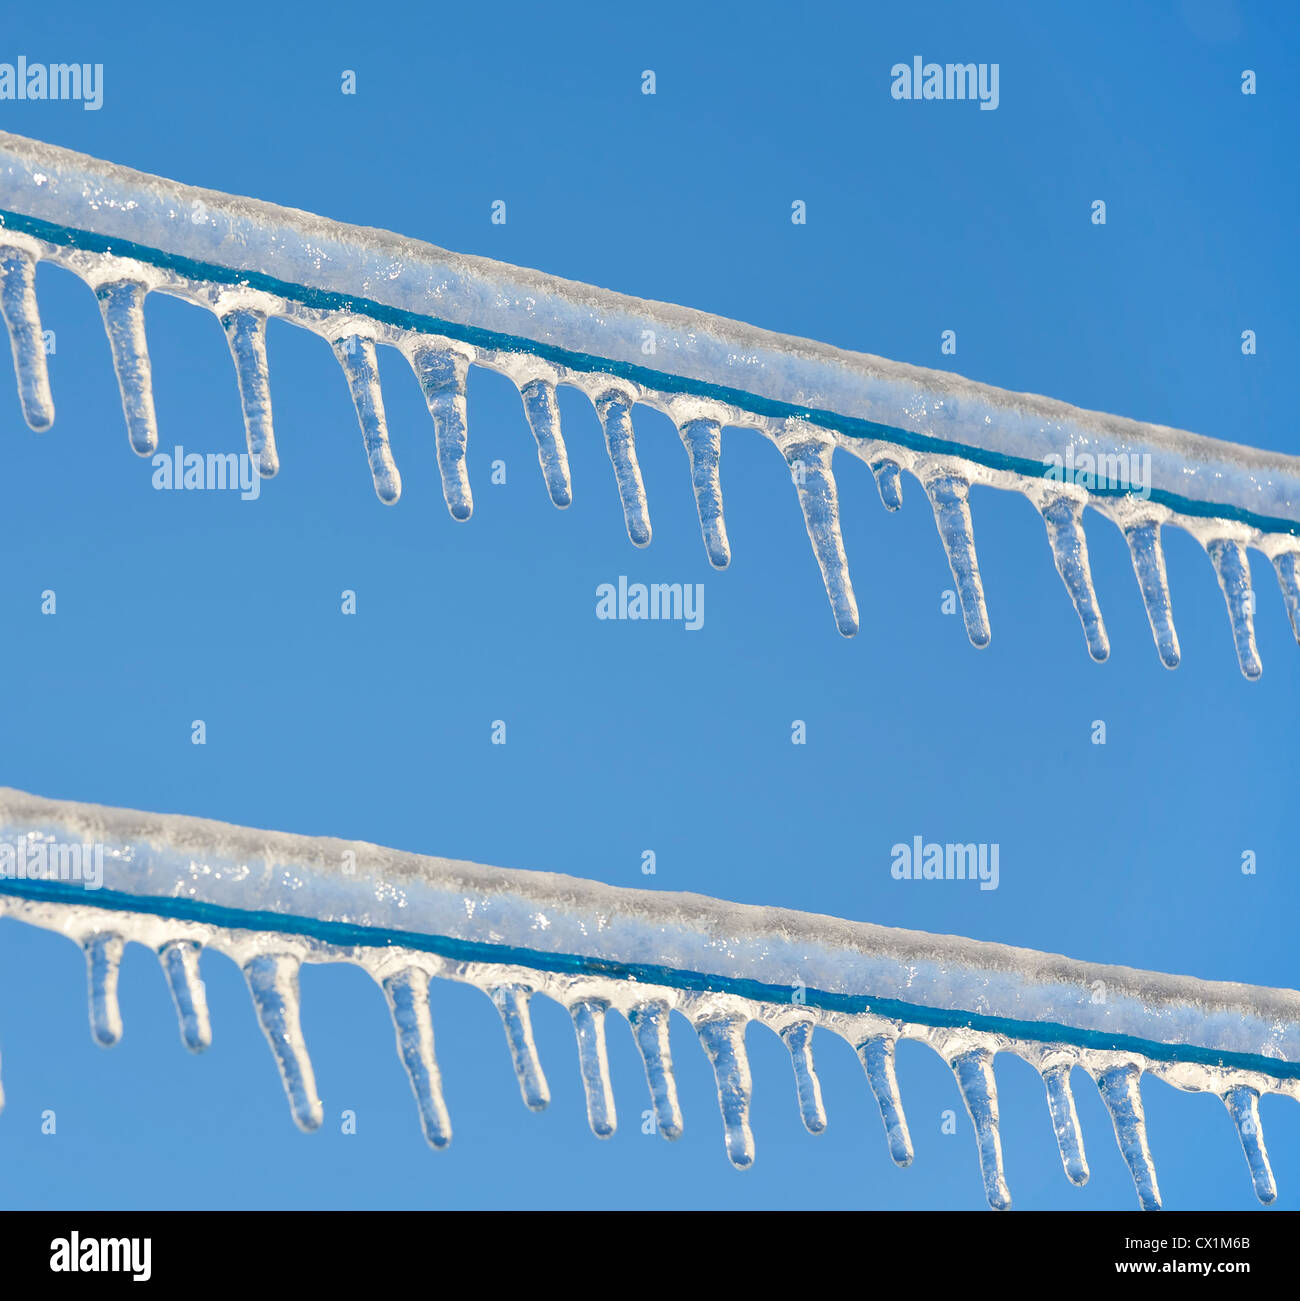 Icicles hanging from a frozen clothesline against a bright clear blue sky. Stock Photo